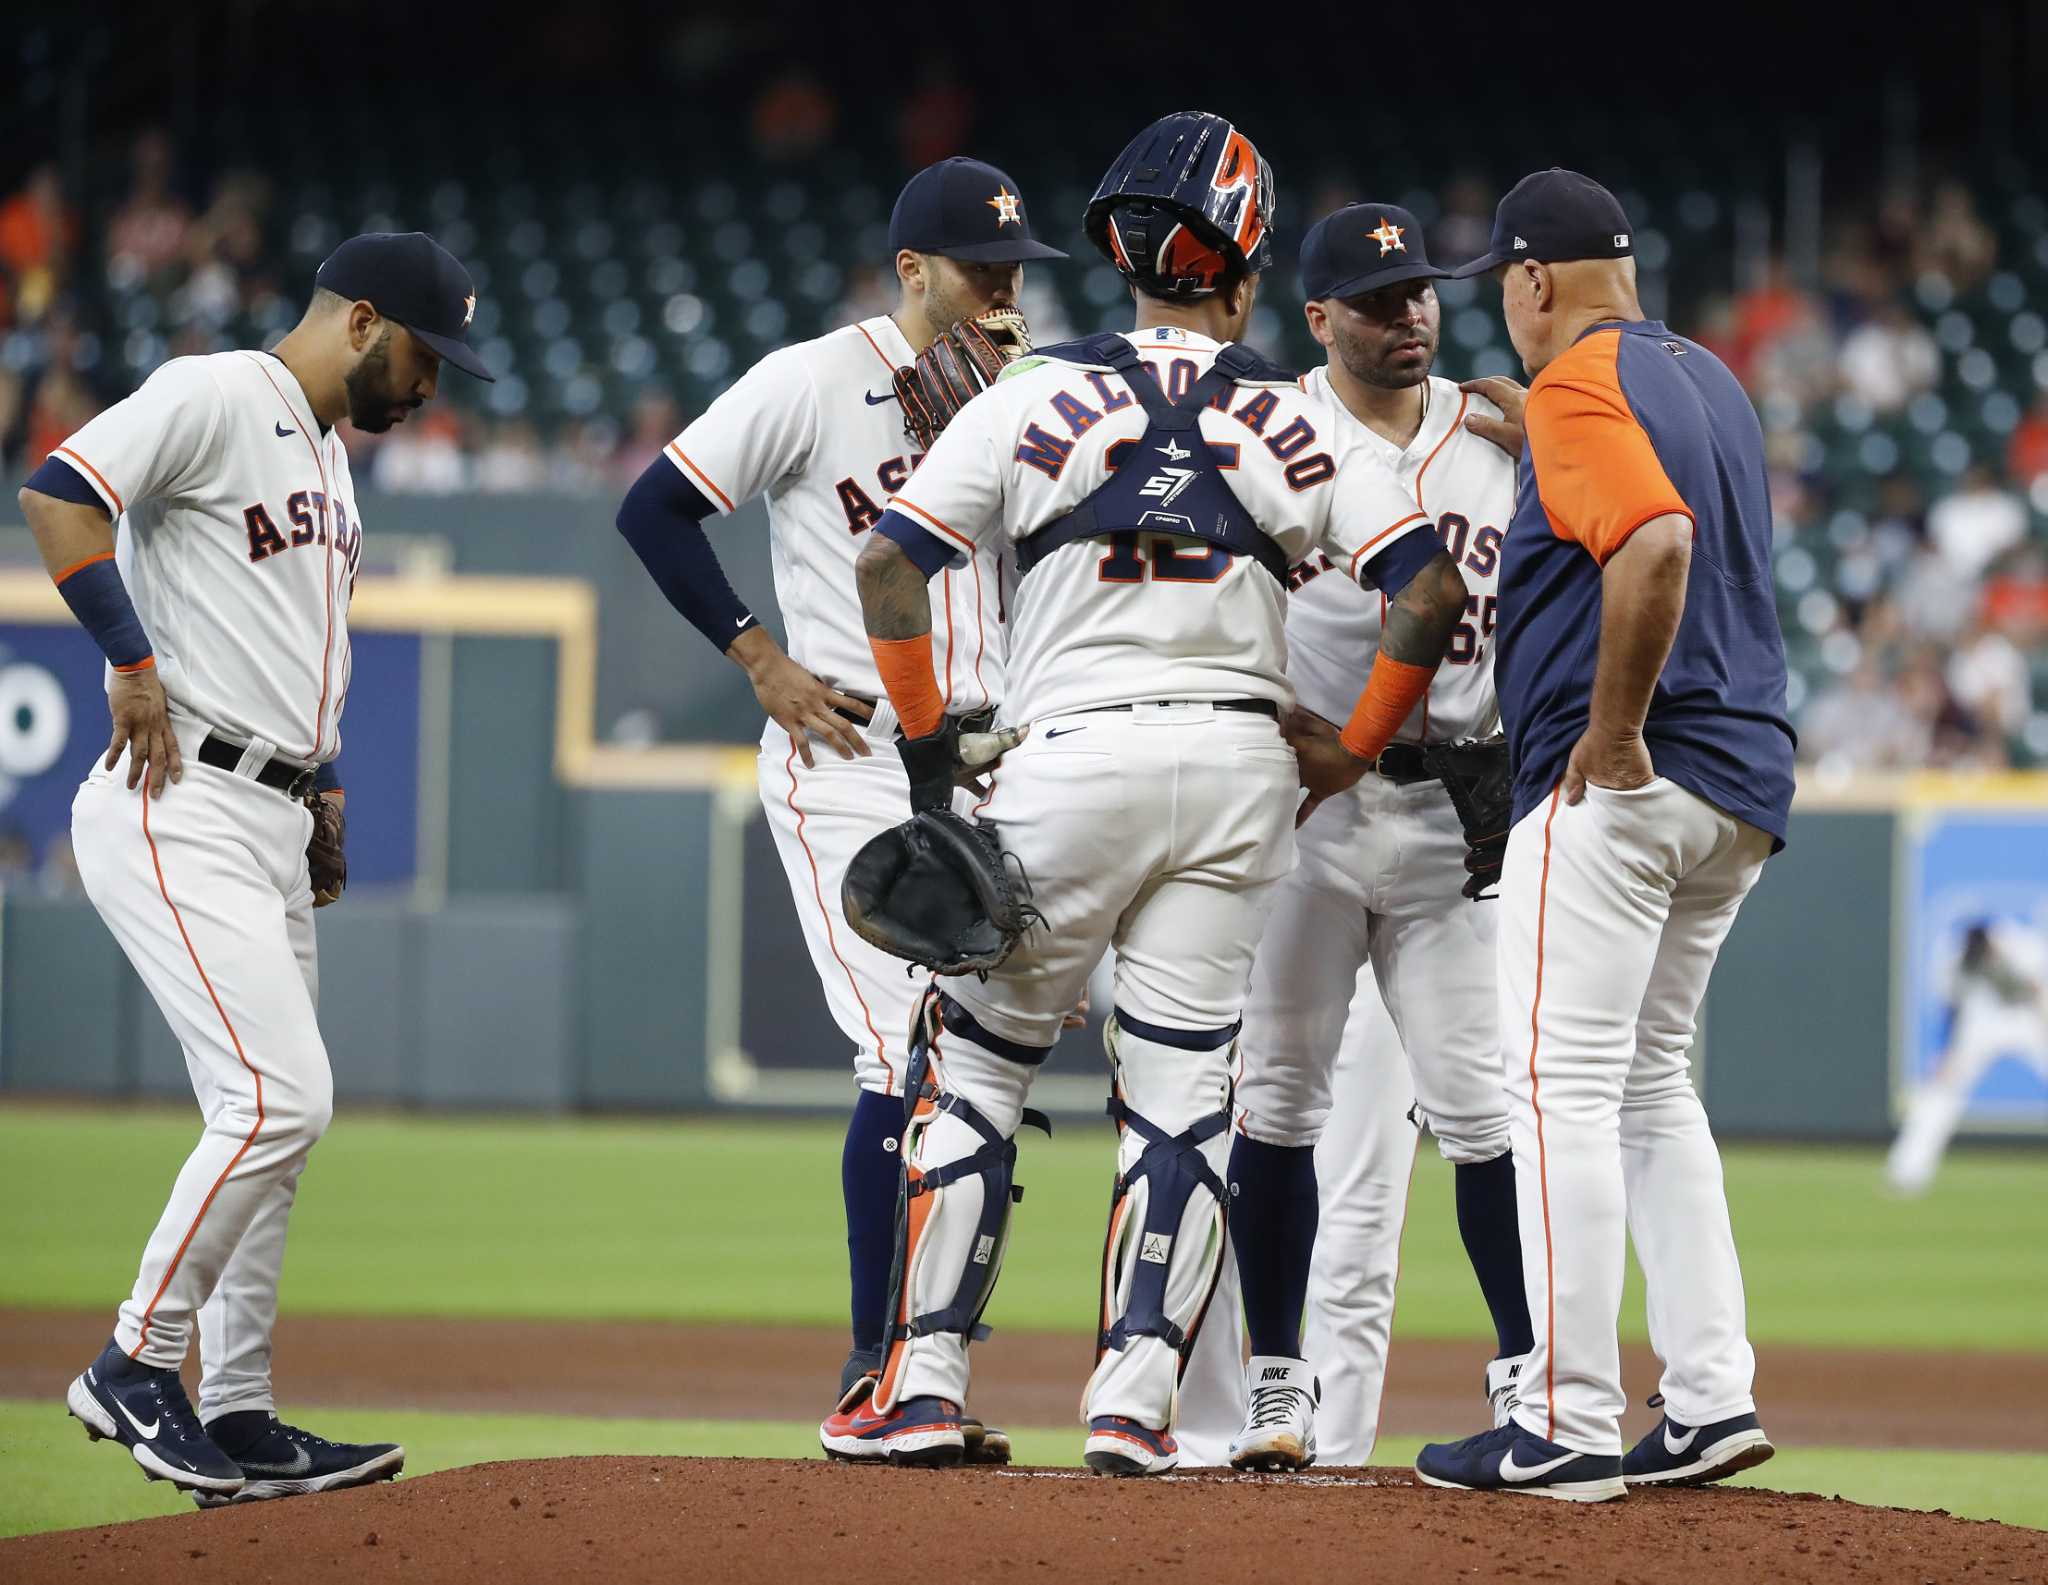 Watch: Astros P Zack Greinke loses no-hitter with one out in 9th inning 